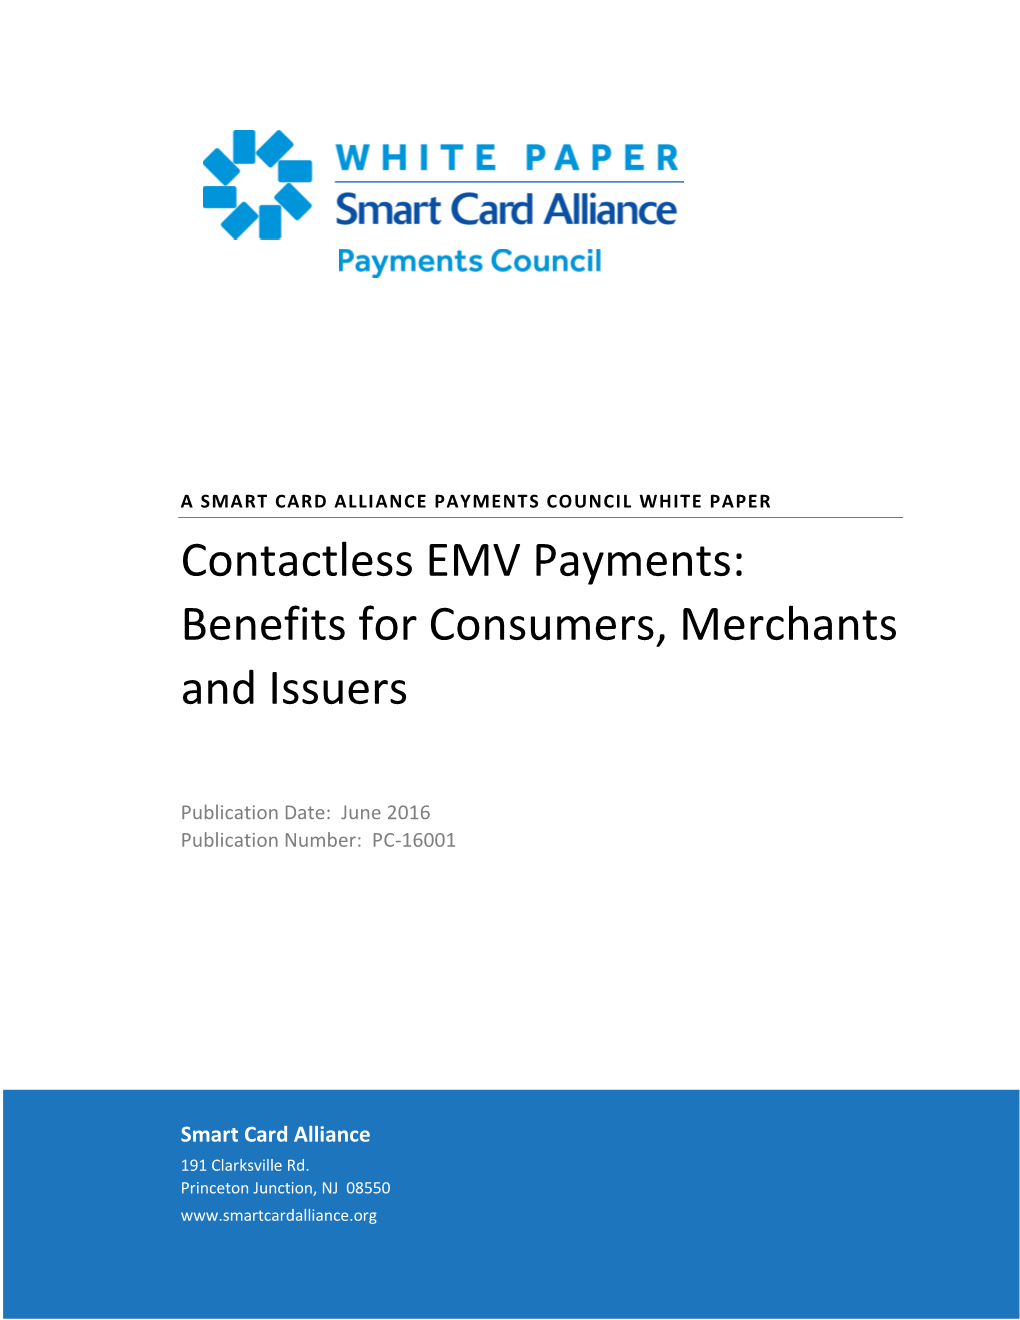 Contactless EMV Payments: Benefits for Consumers, Merchants and Issuers